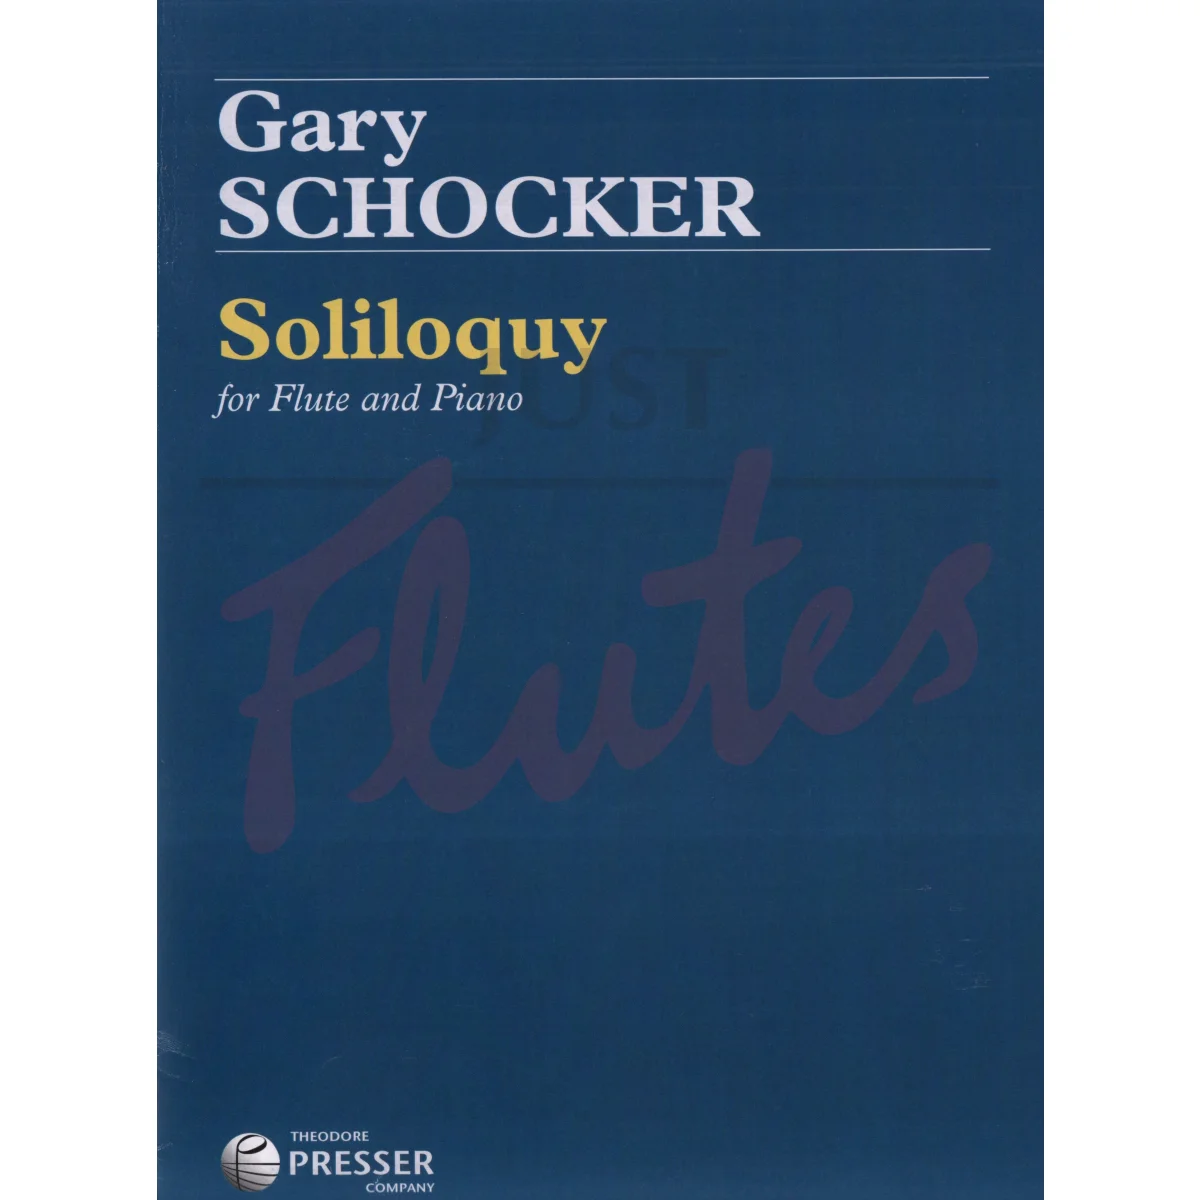 Soliloquy for Flute and Piano